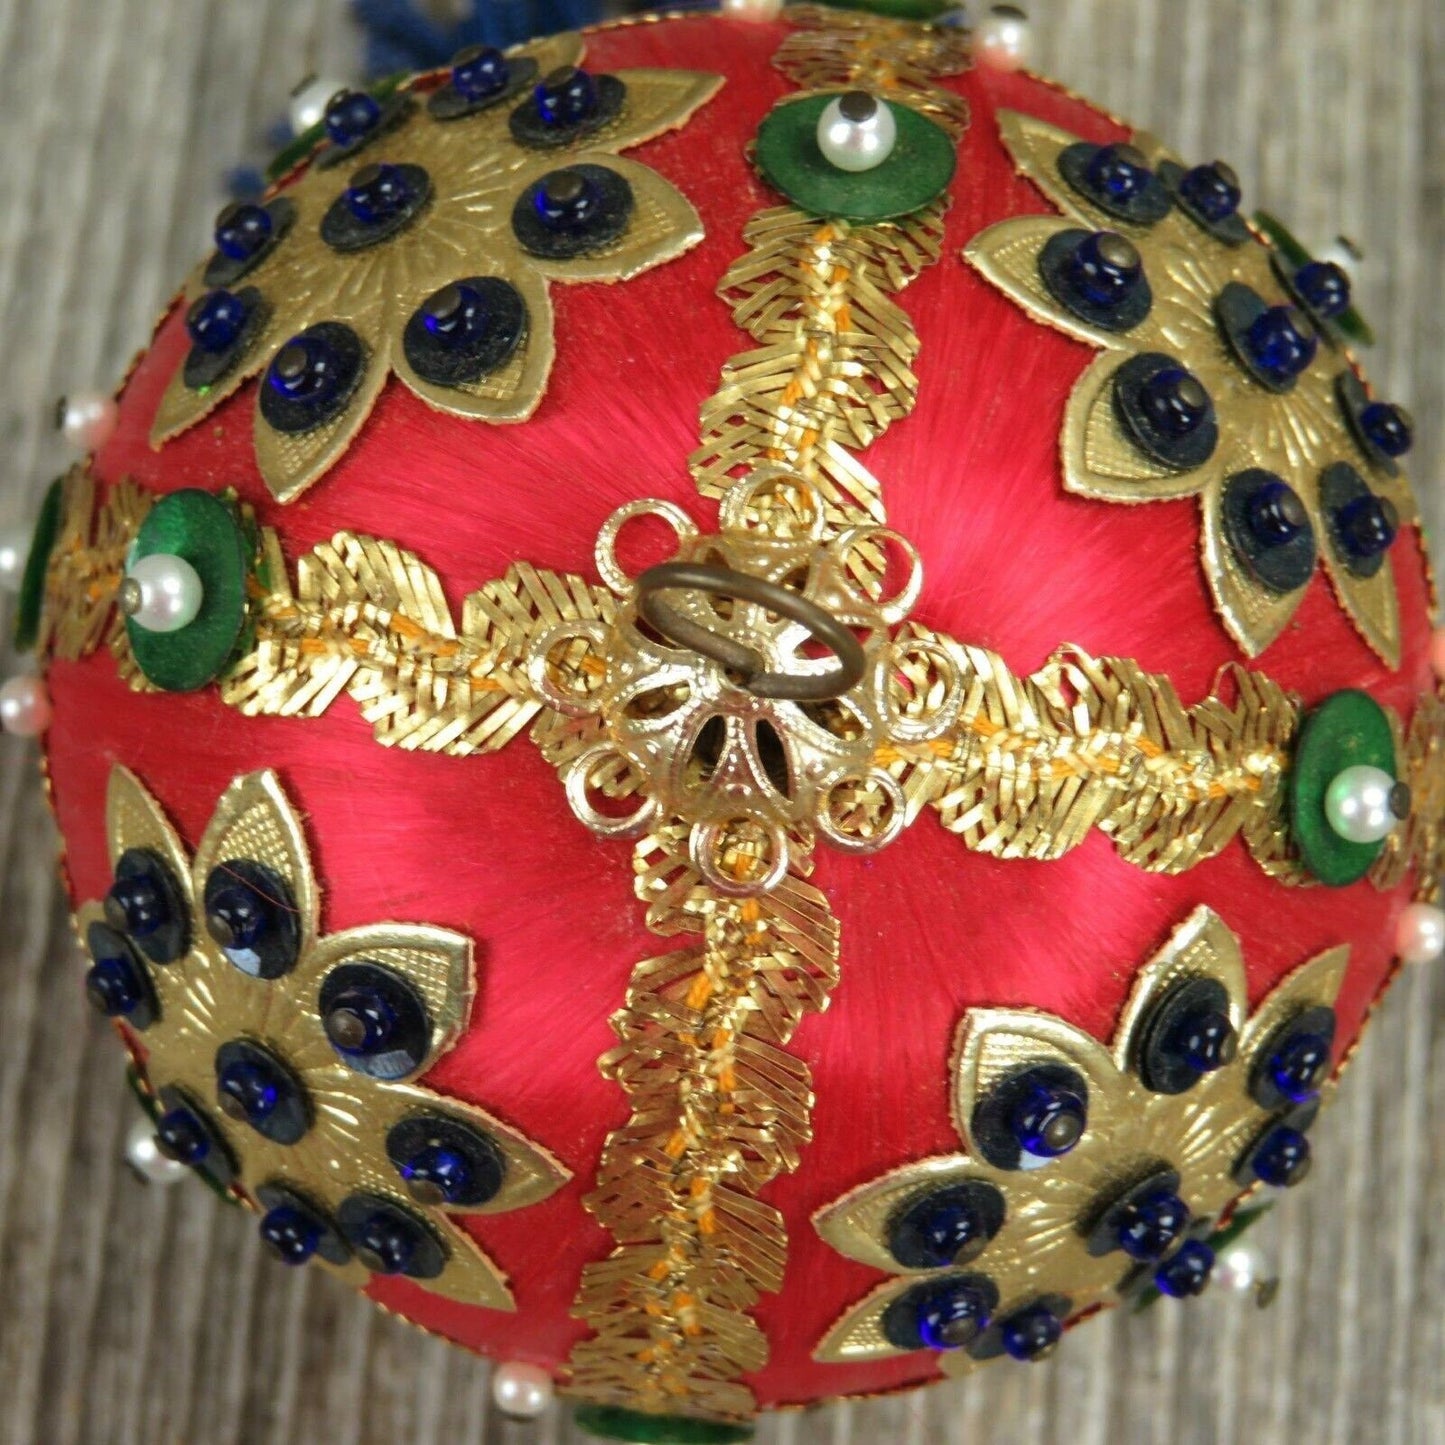 Vintage Beaded Ball Ornament Sequined Satin Handmade Christmas Red Blue Green